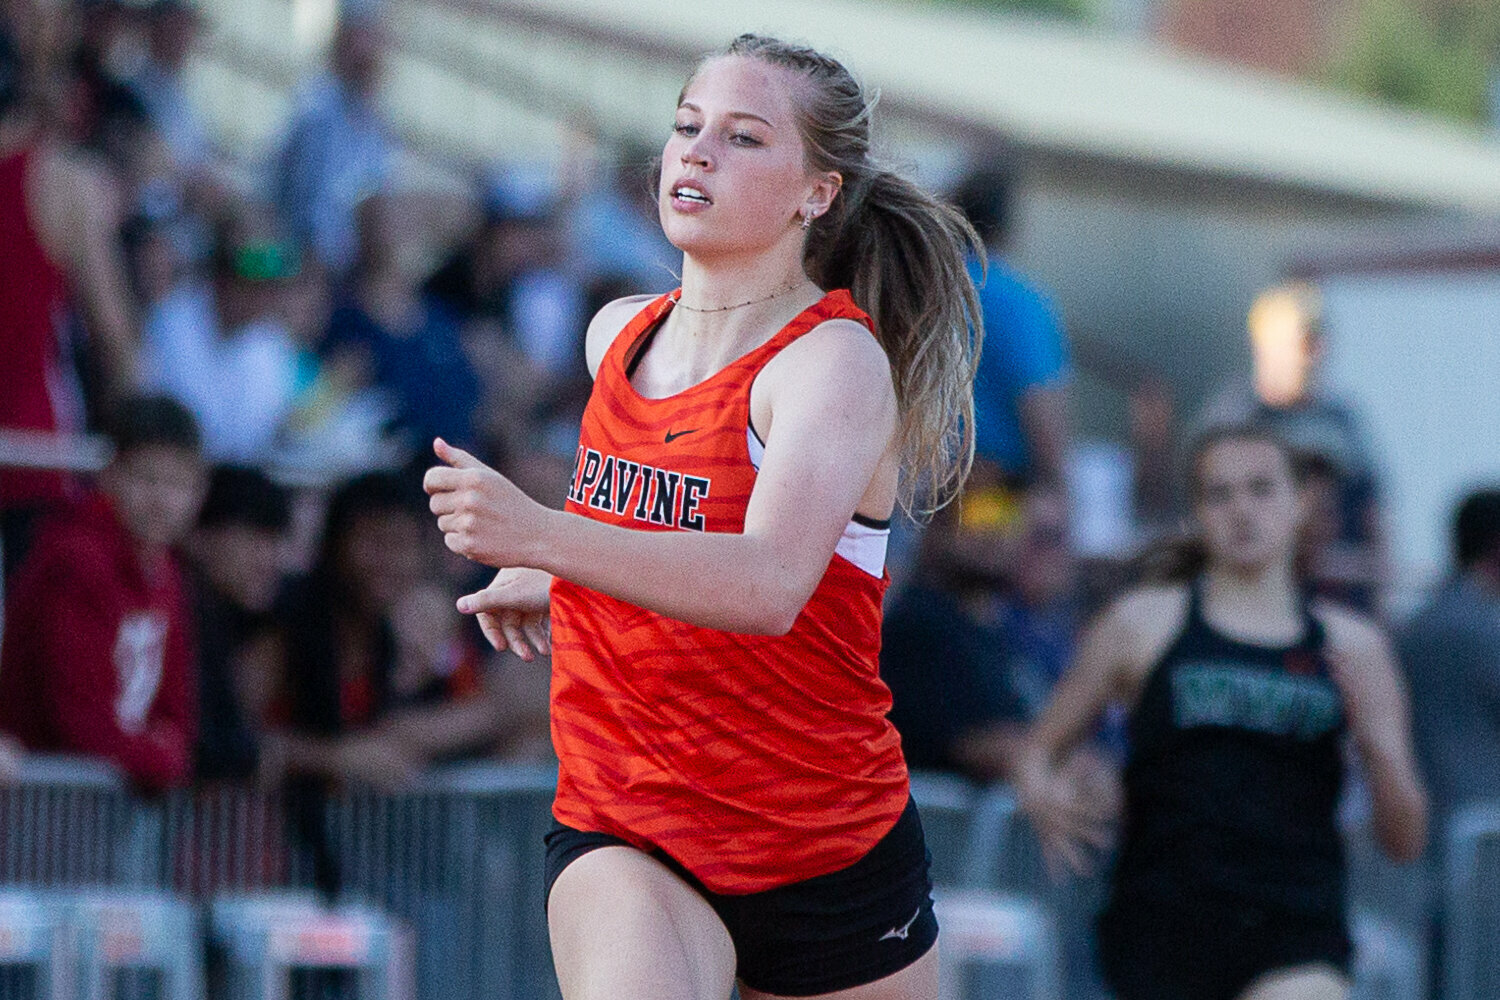 Napavine's Morgan Hamilton crosses the finish line in the 400-meter dash May 19 at W.F. West in the 2B District 4 Championships.